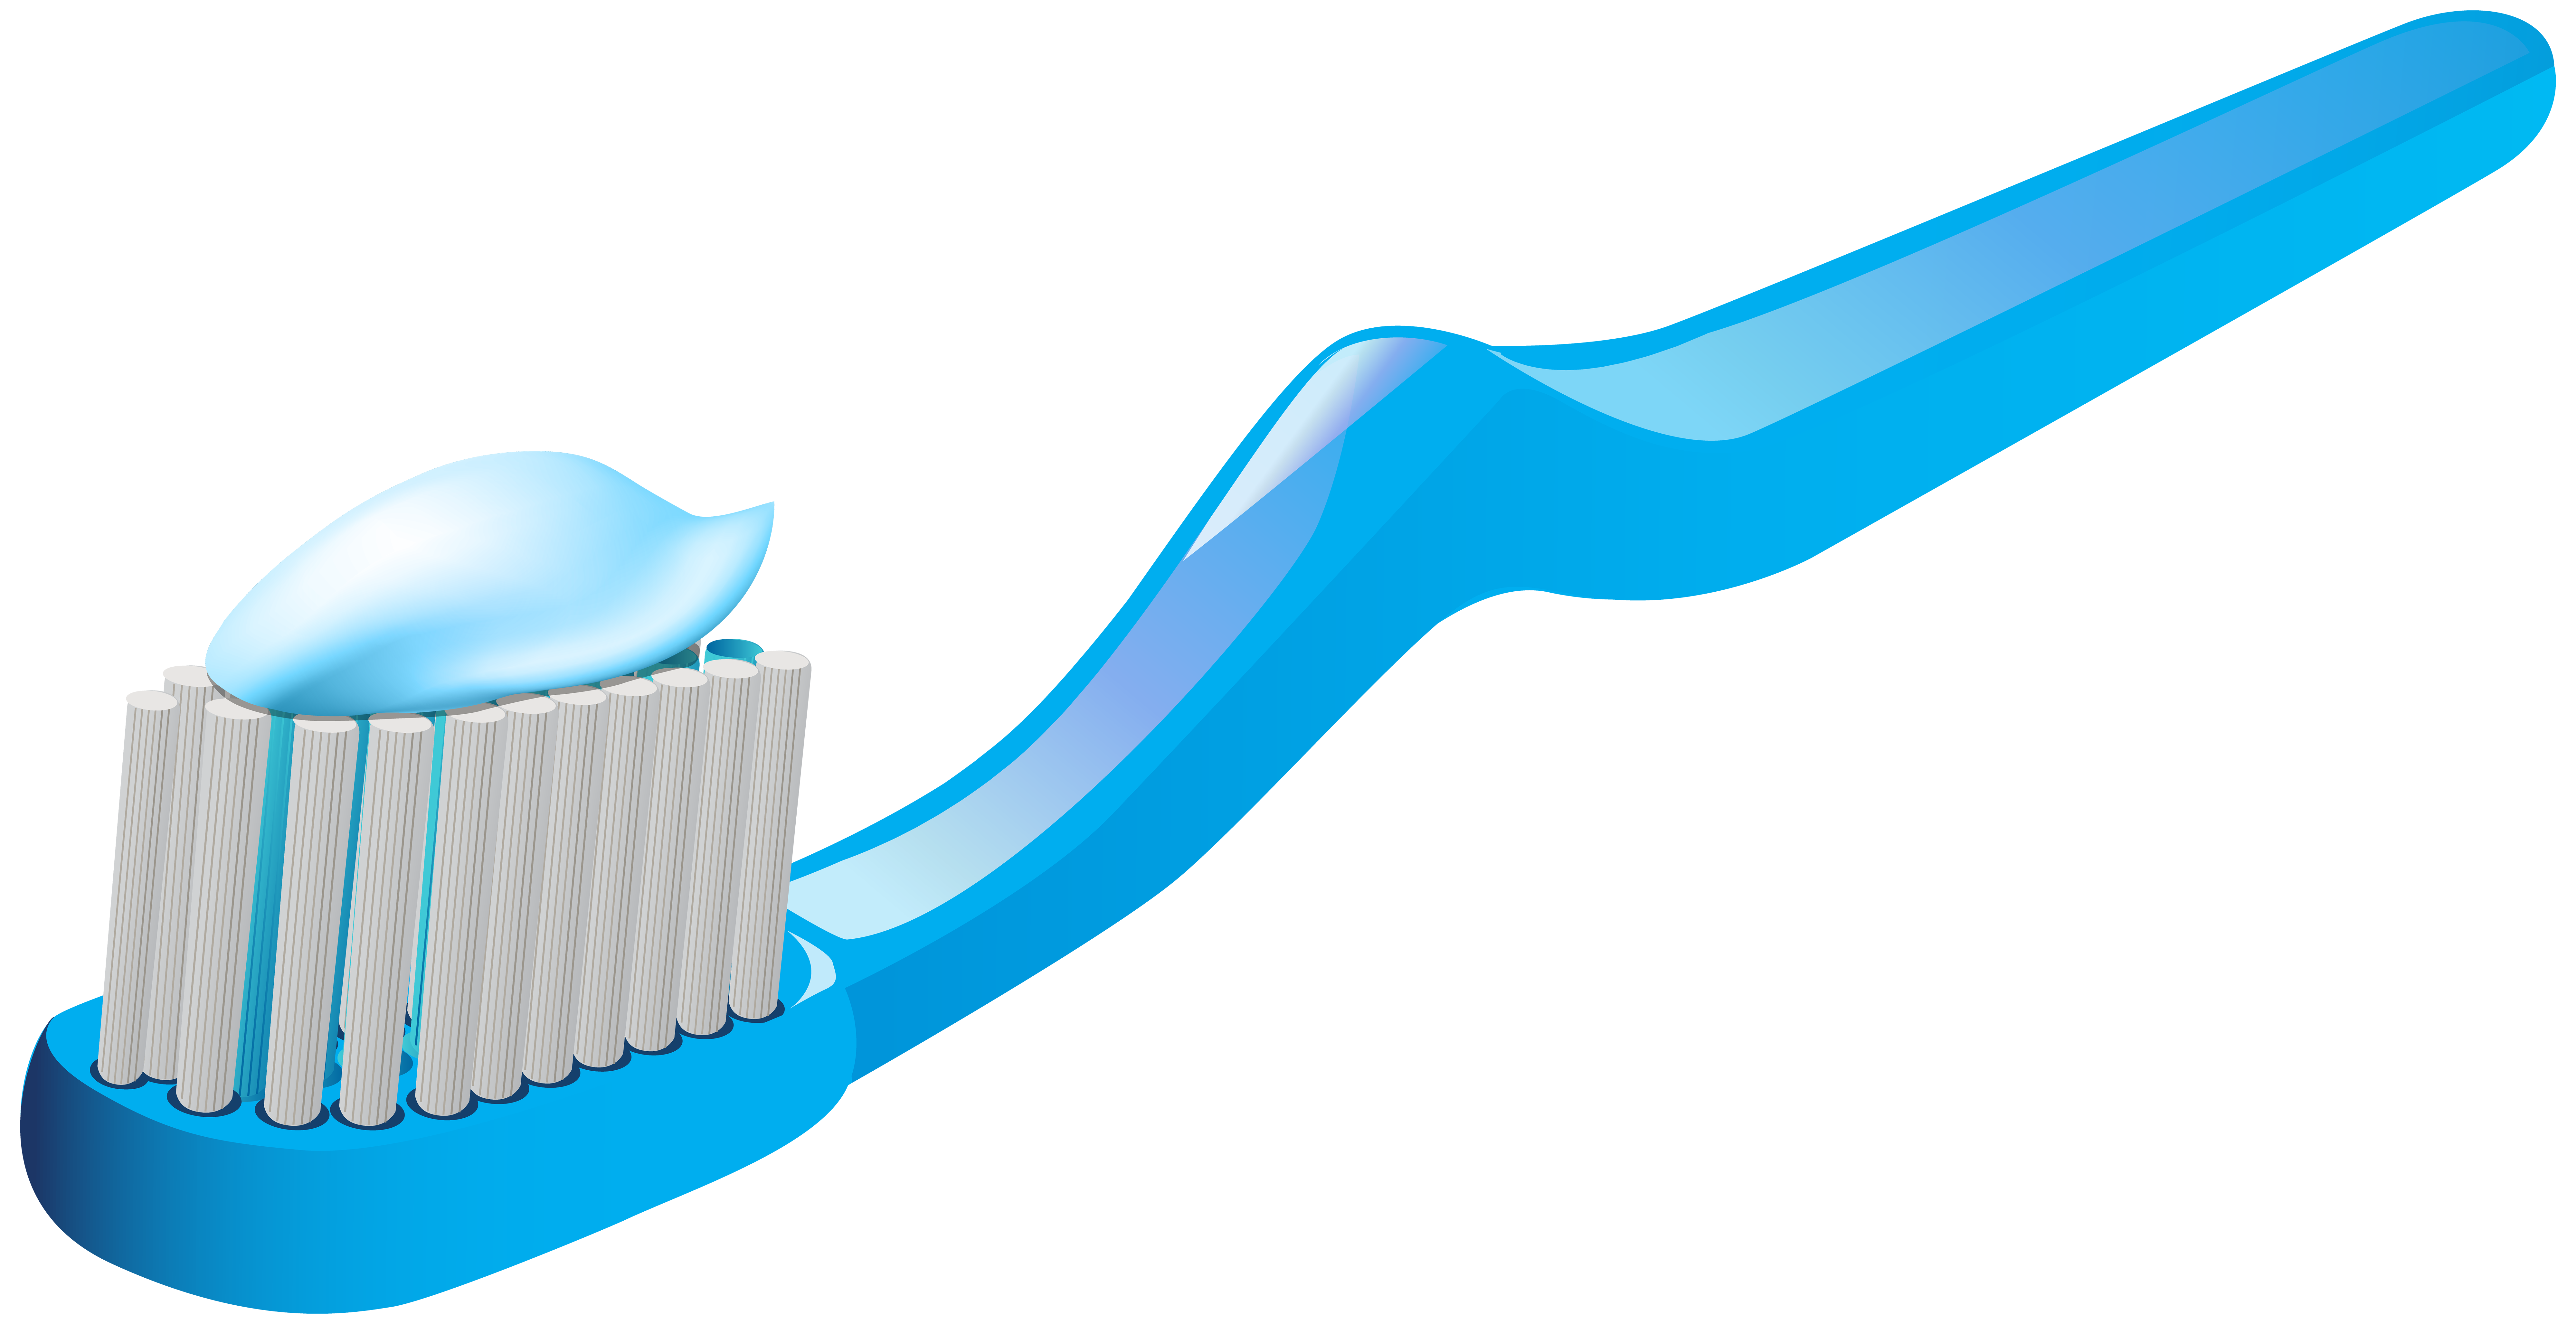 toothpaste on toothbrush clipart